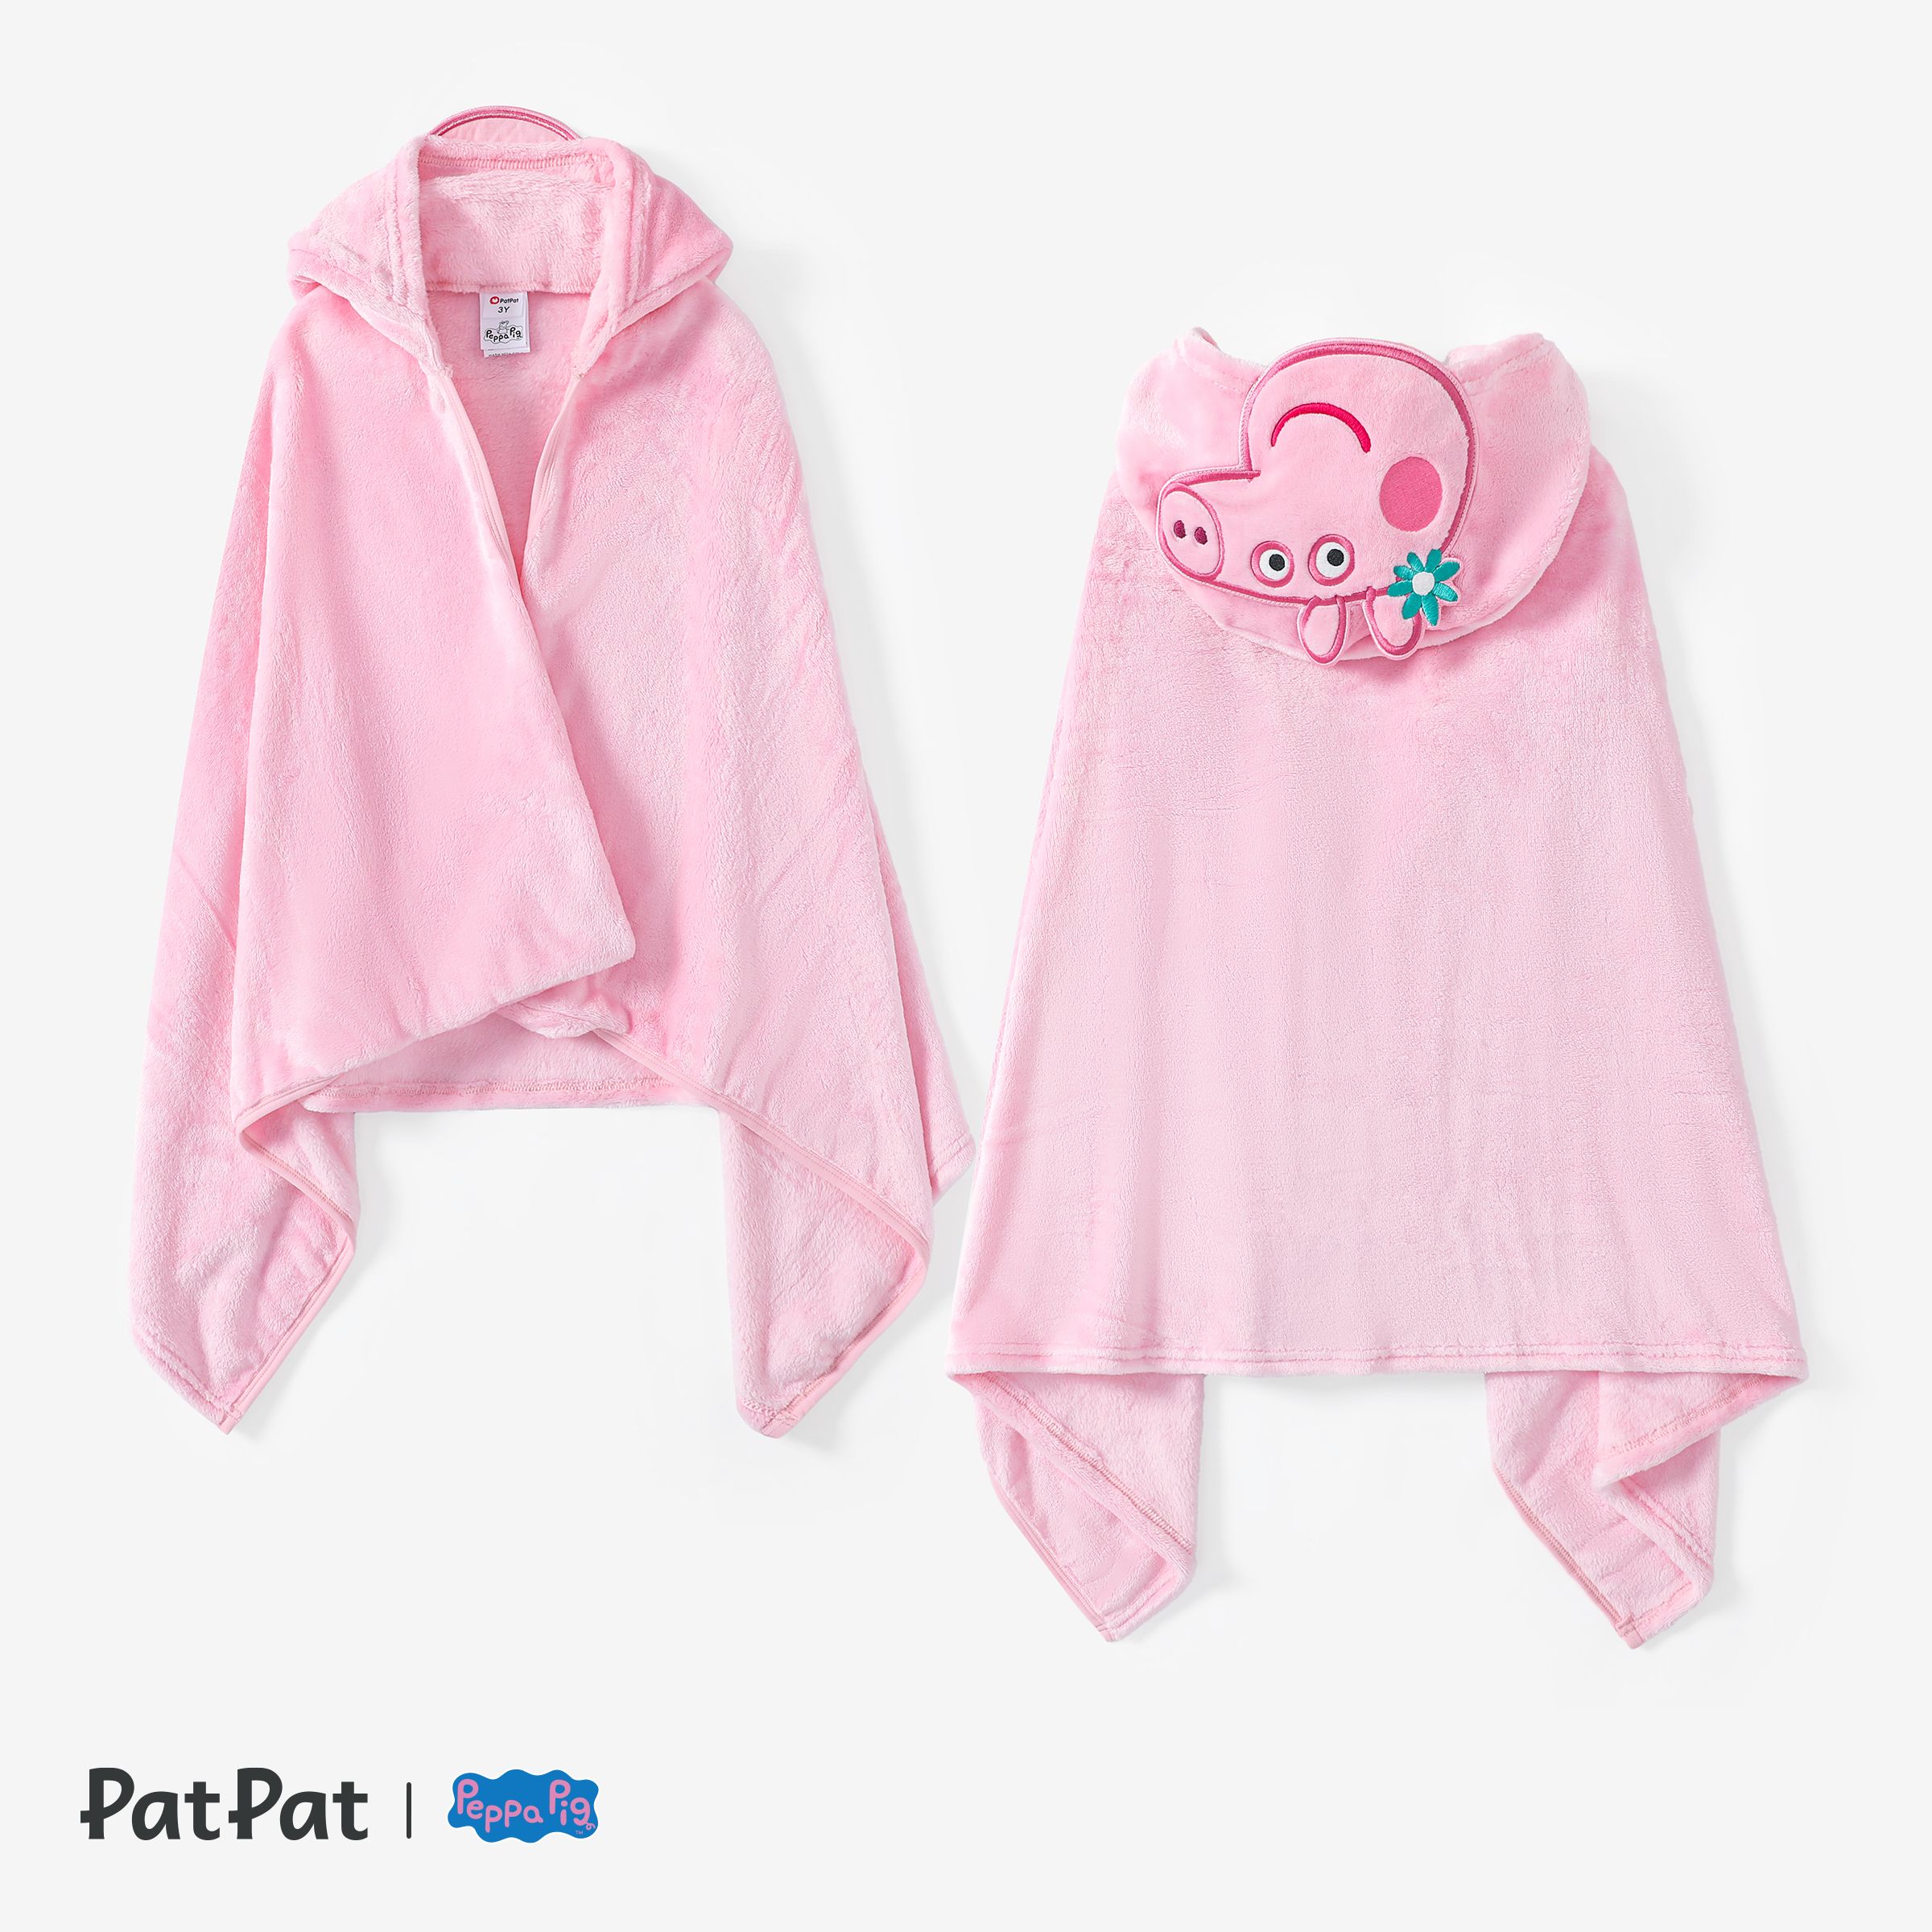 

Peppa Pig Toddler Girls 1pc Character Embroidery Print Bath/Beach/Pool Hooded Towels